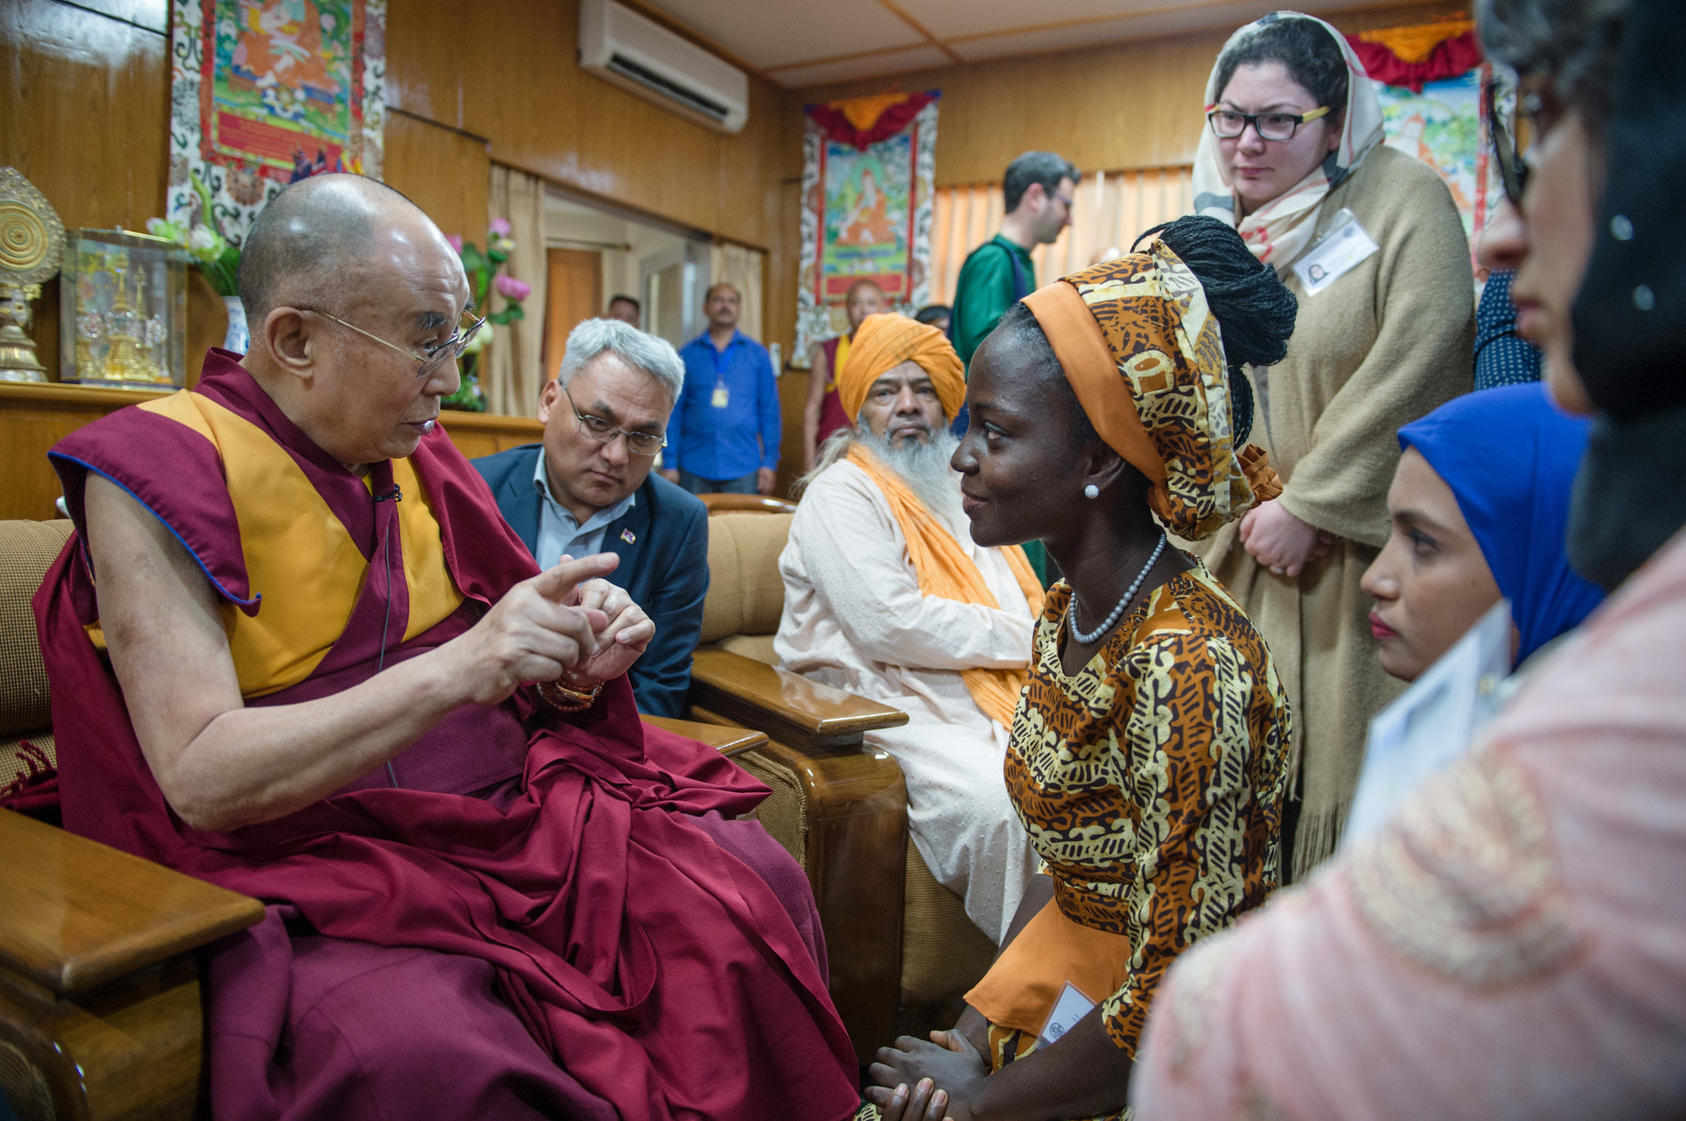 His Holiness the Dalai Lama serves cookies to young peace leaders during meetings with them at his residence in Dharamsala, India. Photo: Tenzin Choejor/OHHDL